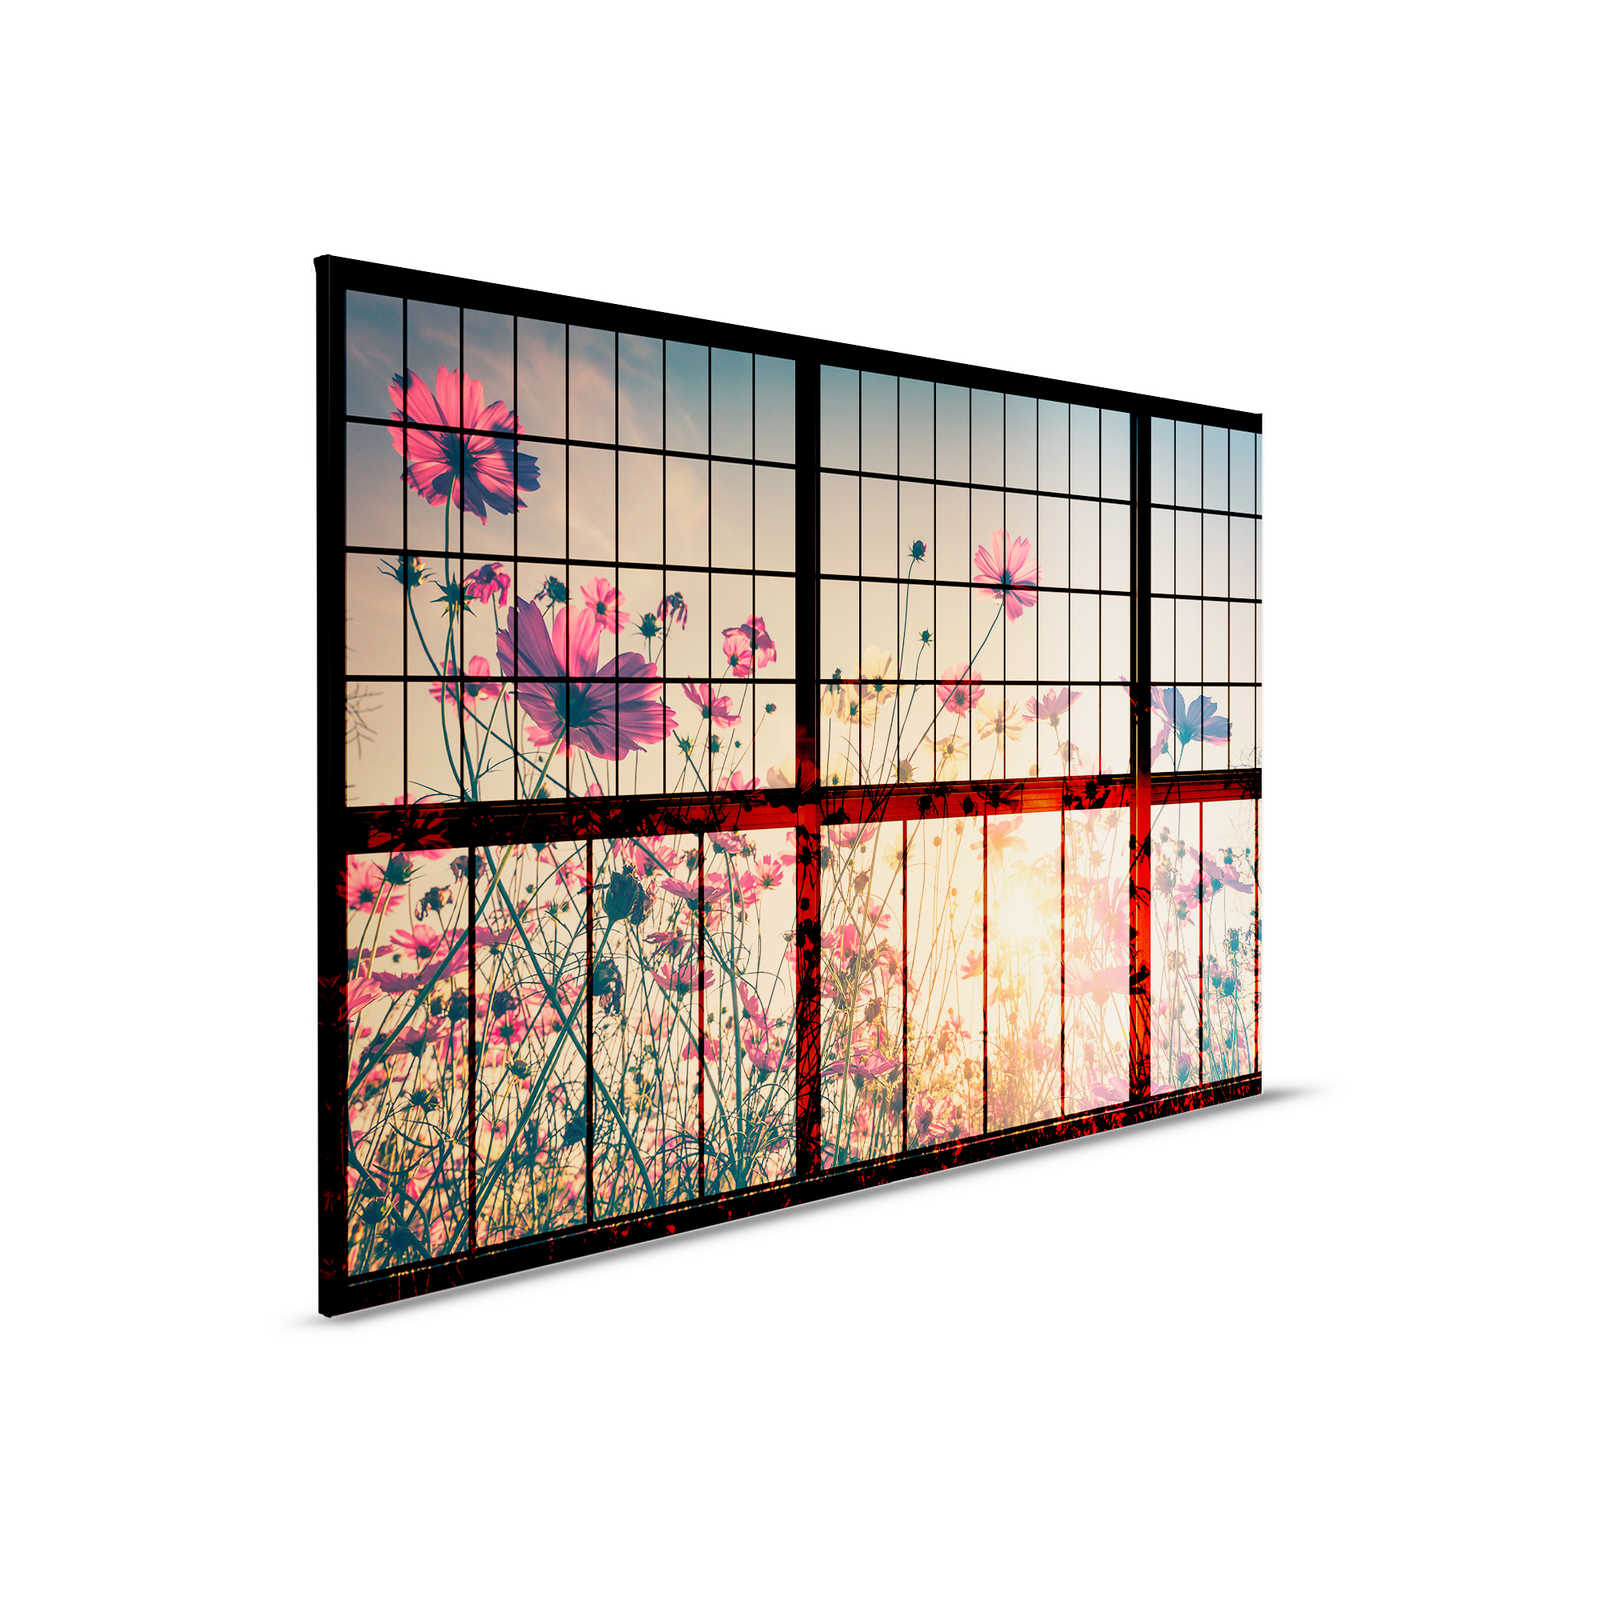         Meadow 1 - Muntin Window Canvas Painting with Flower Meadow - 0.90 m x 0.60 m
    